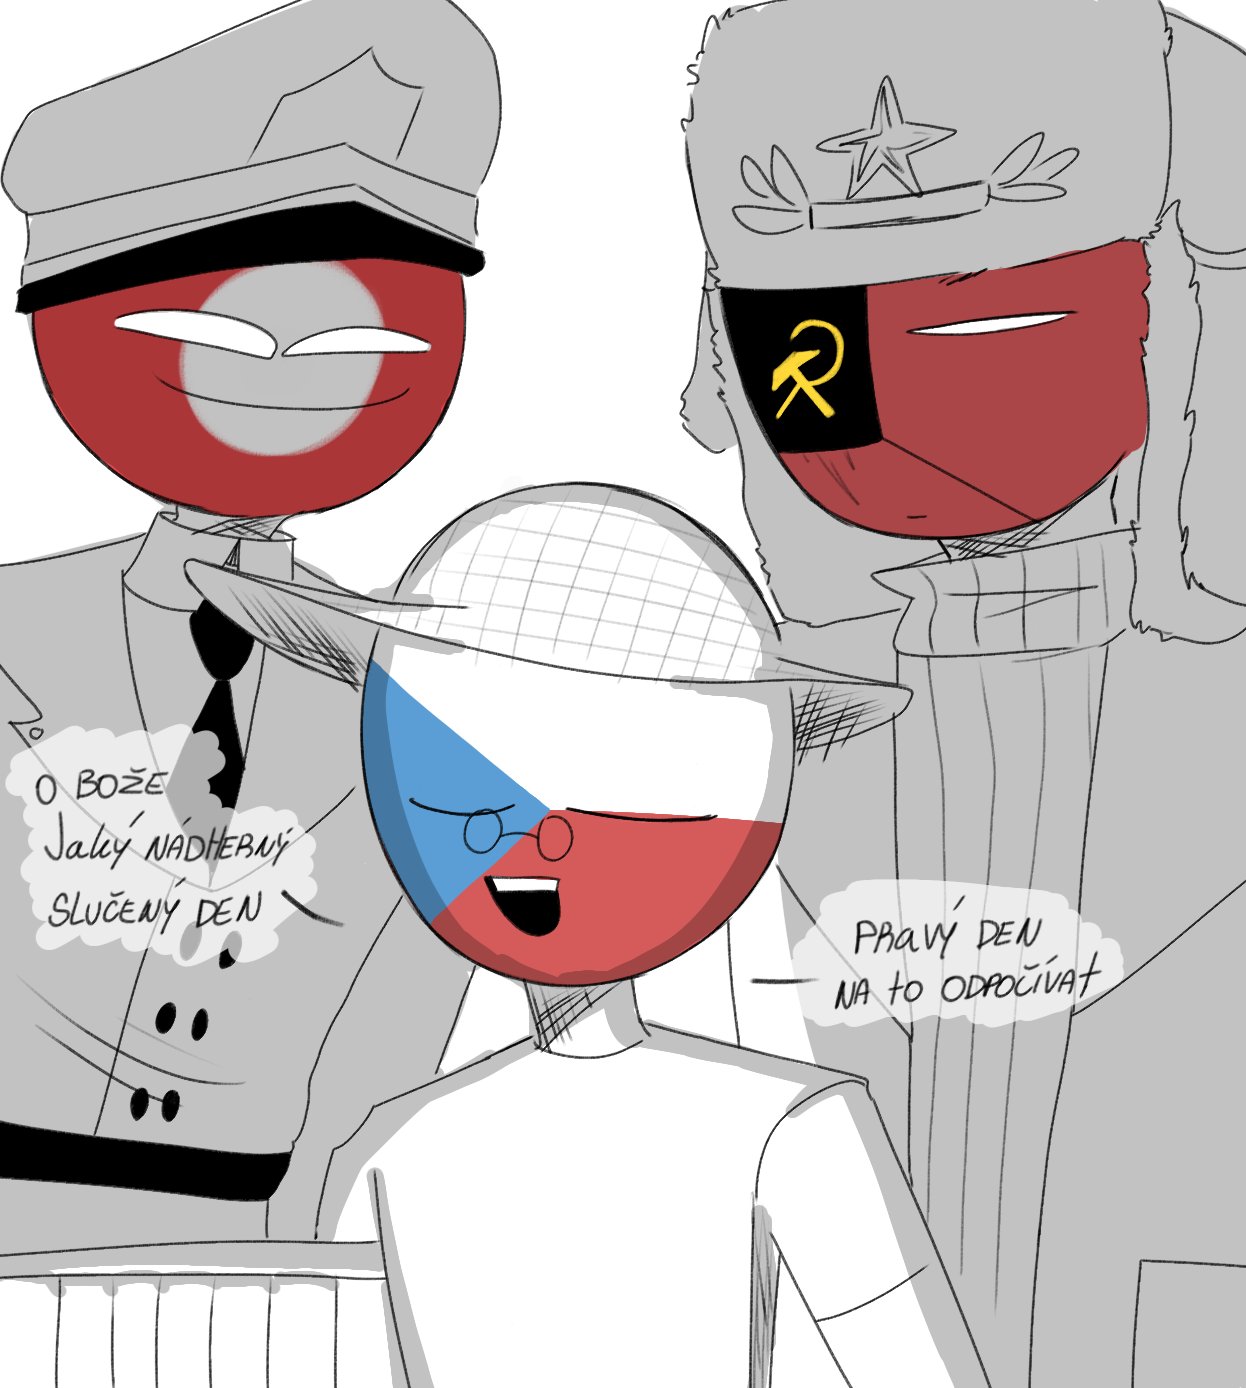 Jacques 炅华 on X: I like both of their ship X3 nz:Where am I from? # countryhumans #countryhumansSecondReich #countryhumansnsfw  #countryhumansaustrohungarian  / X